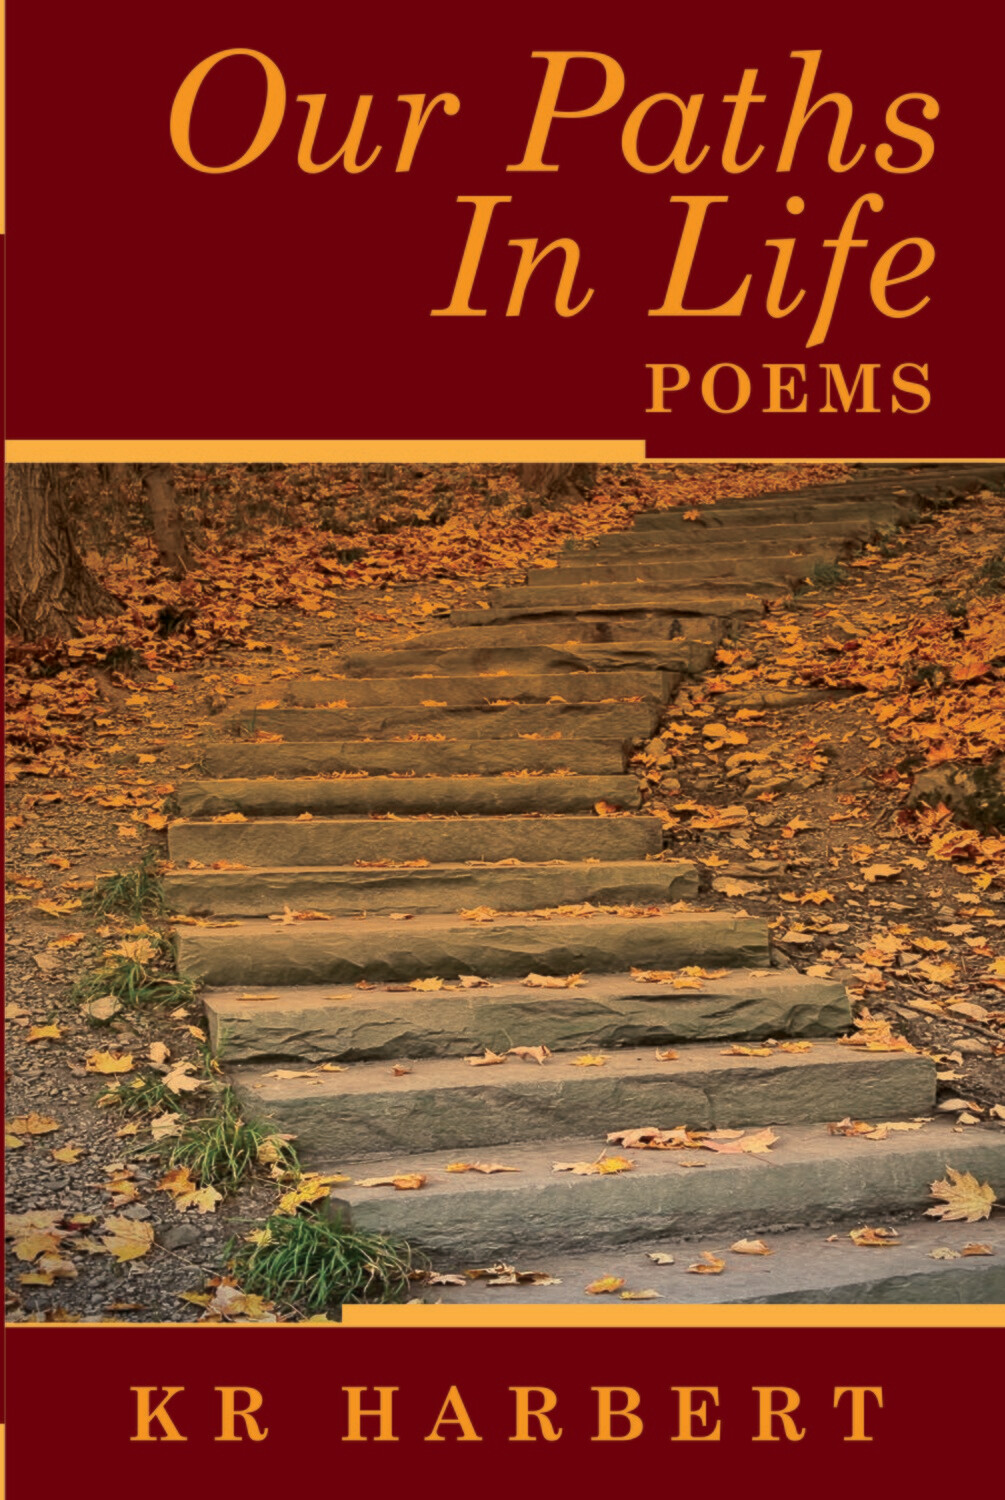 Our Paths in Life: Poems